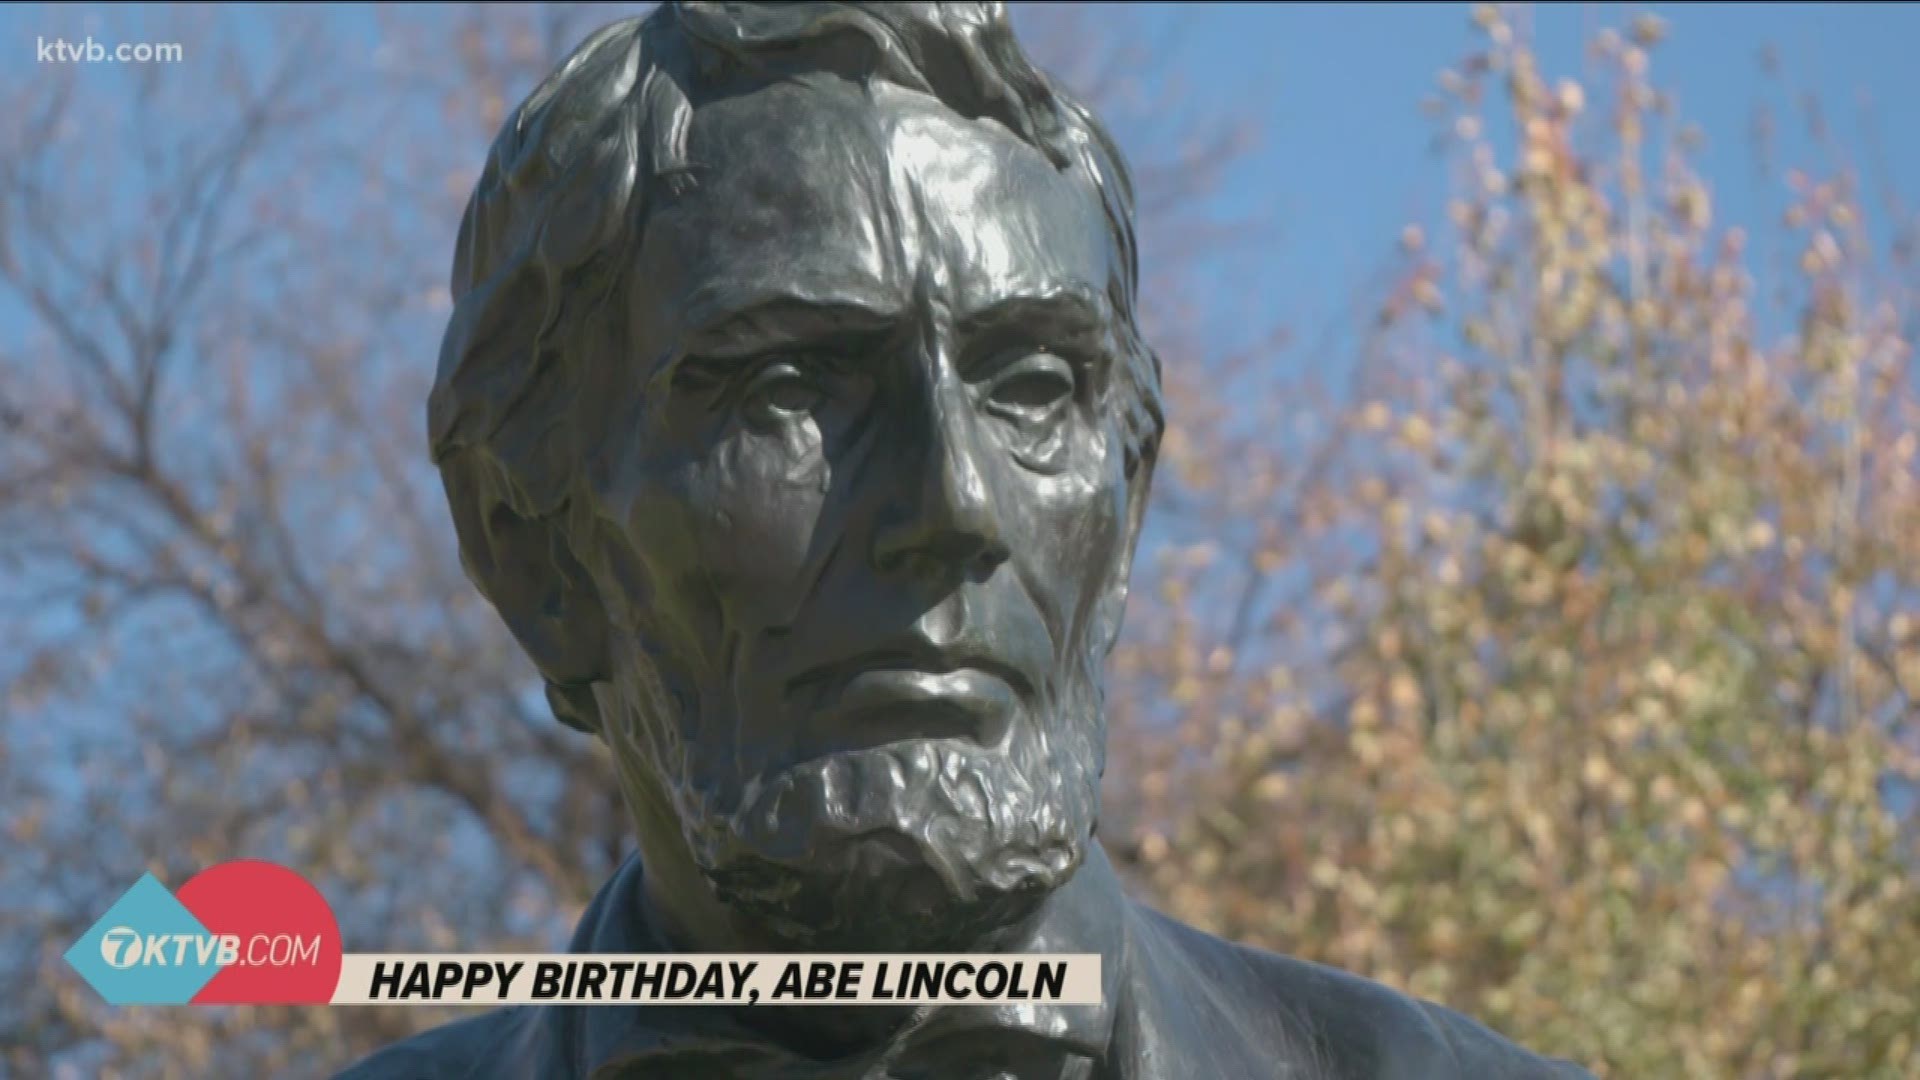 Lincoln was born 211 years ago. He was the 16th president of the United States and is credited with creating the territory of Idaho in 1863.